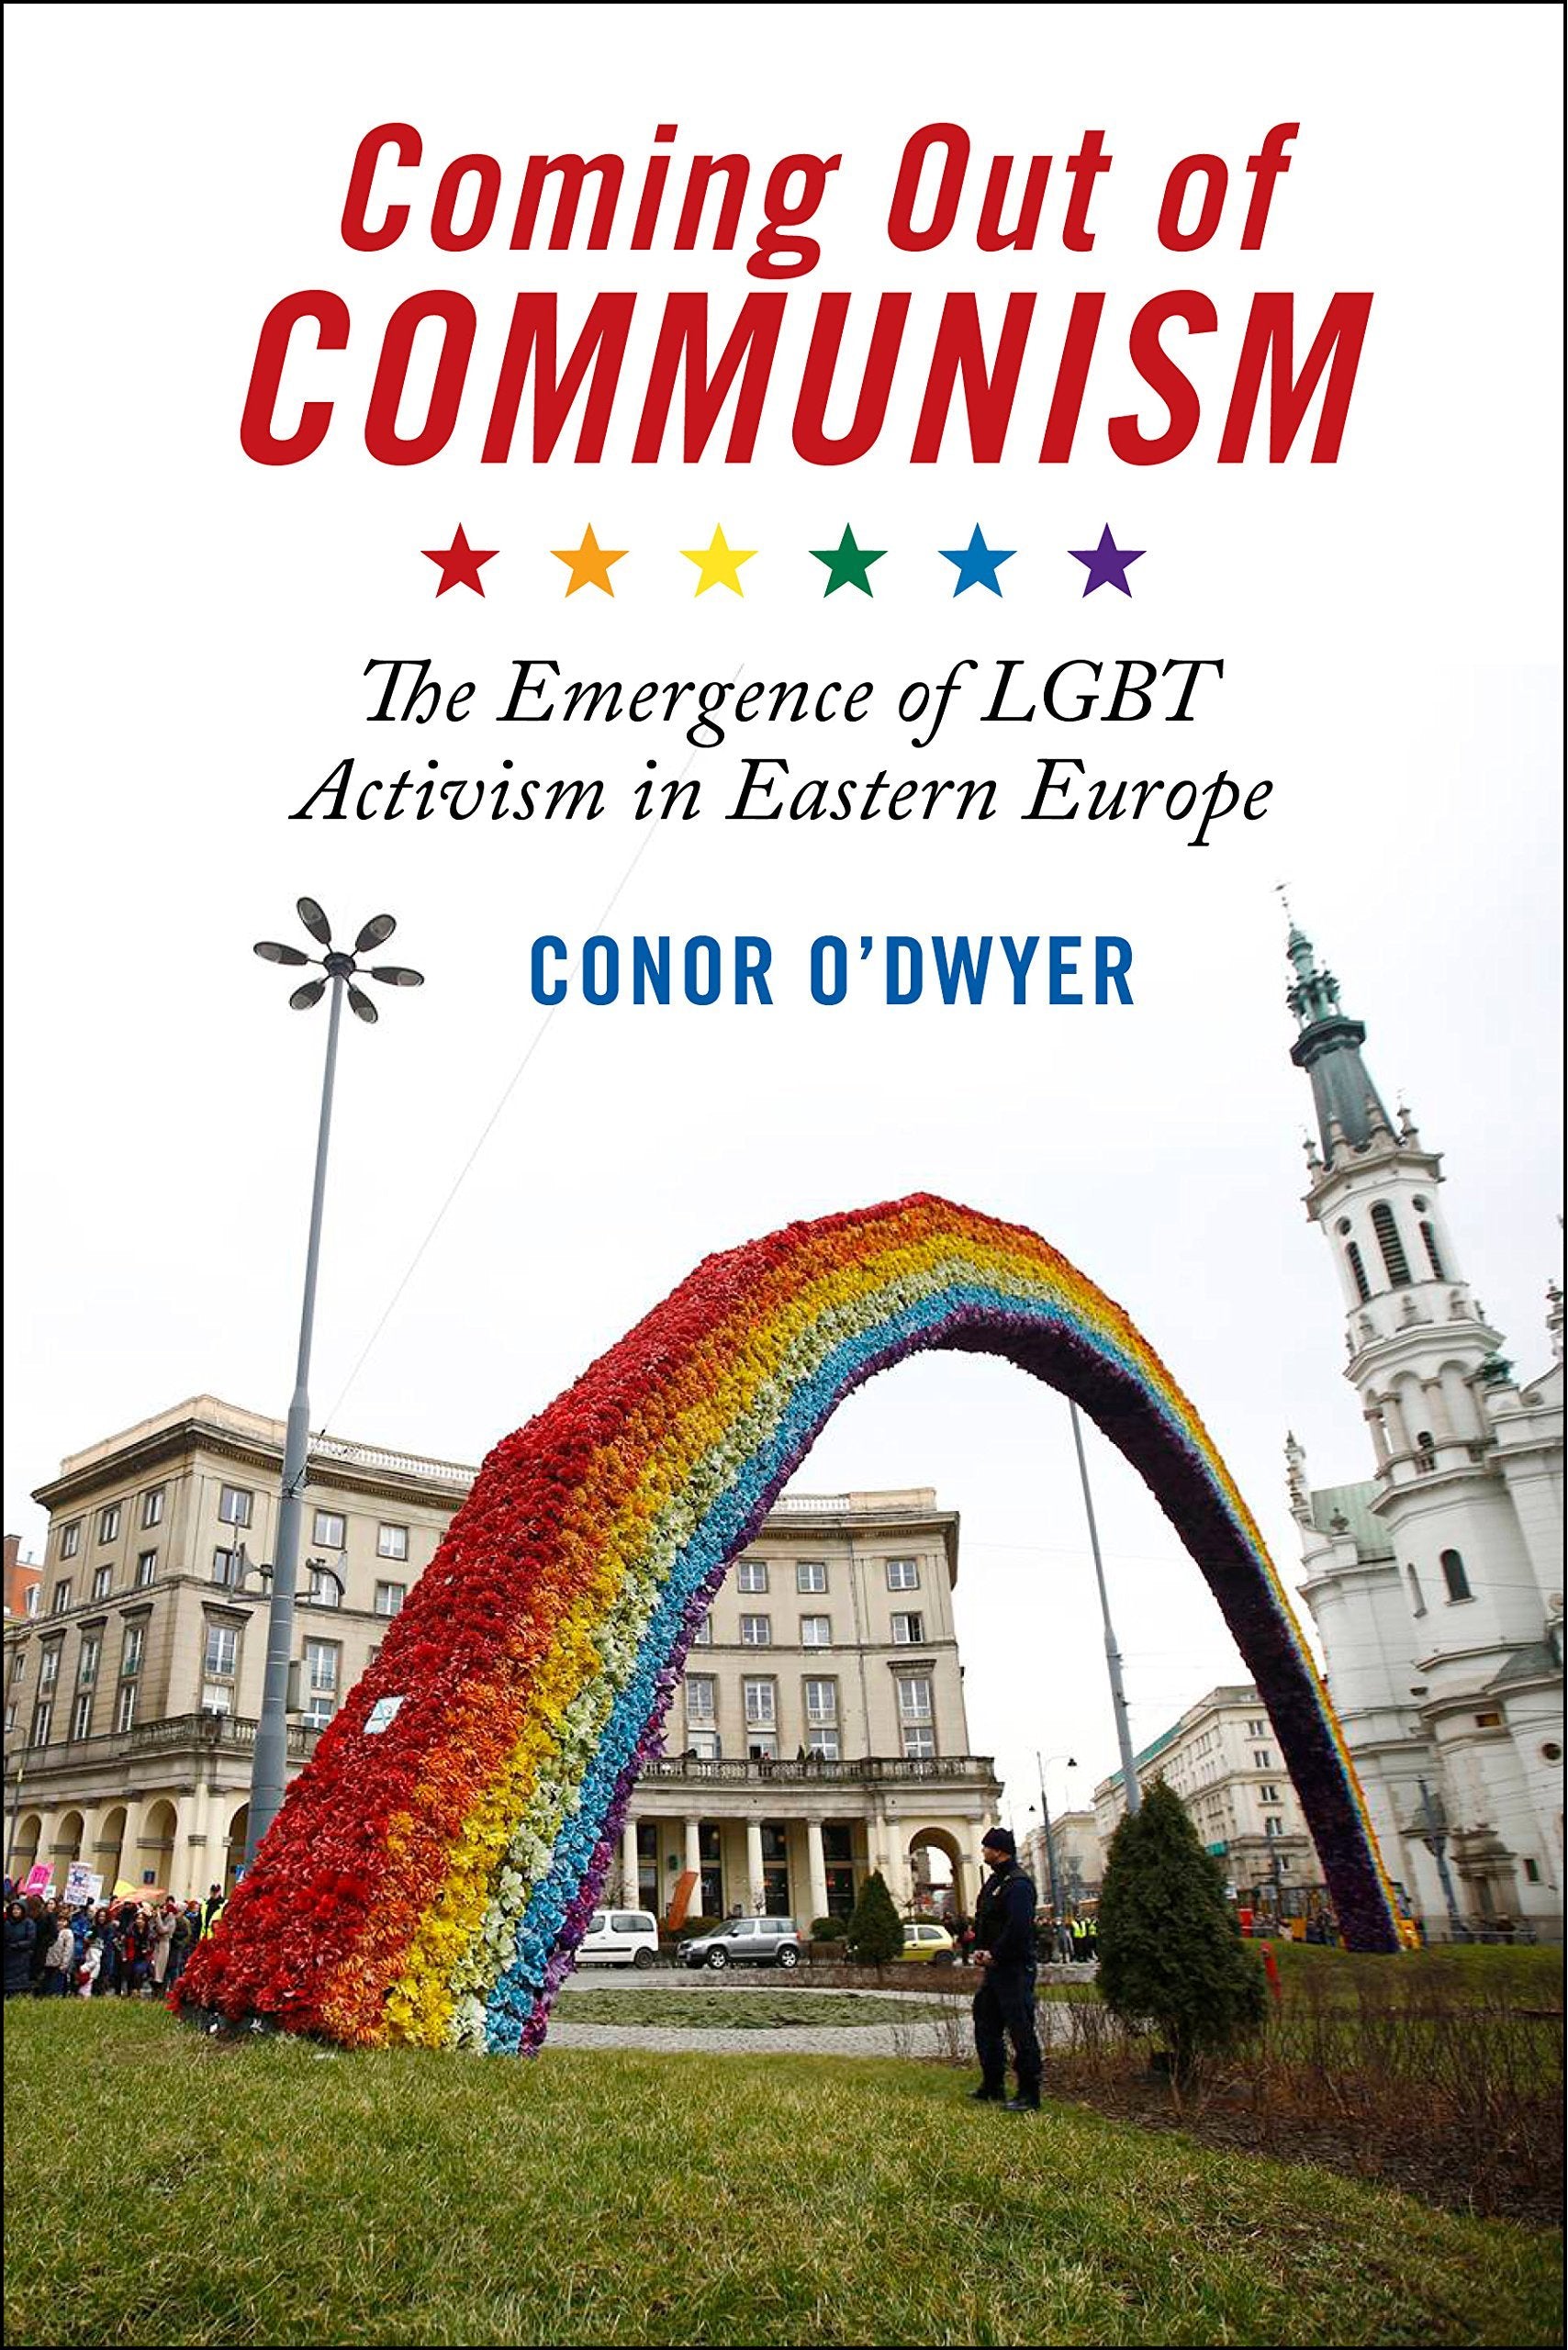 Coming Out of Communism : The Emergence of LGBT Activism in Eastern Europe by Conor O'Dwyer